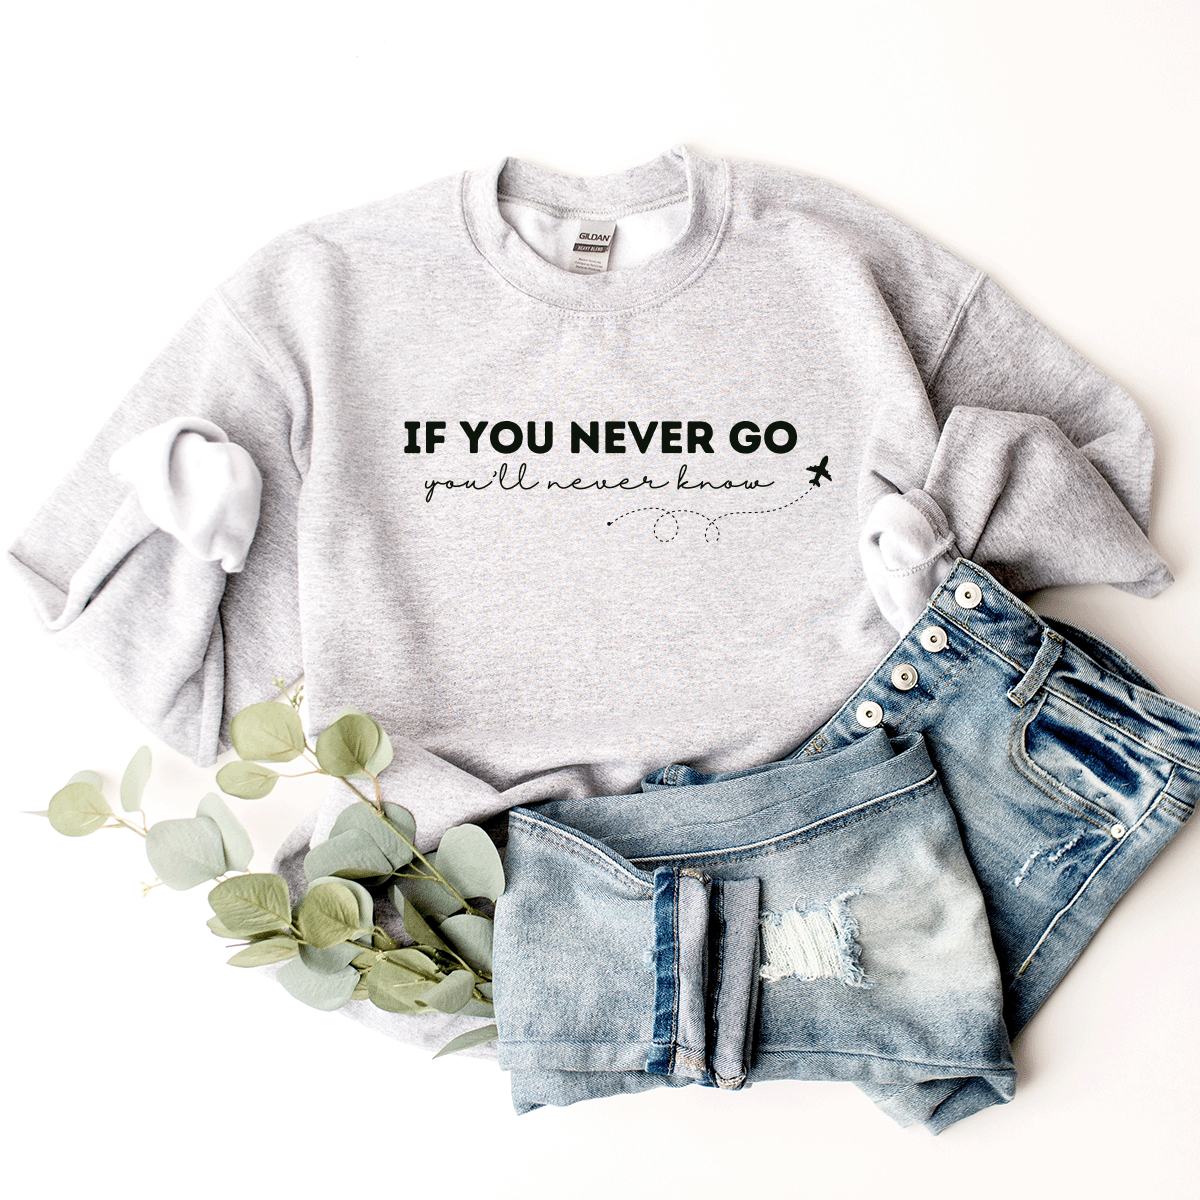 If You Never Go, You'll Never Know - Sweatshirt